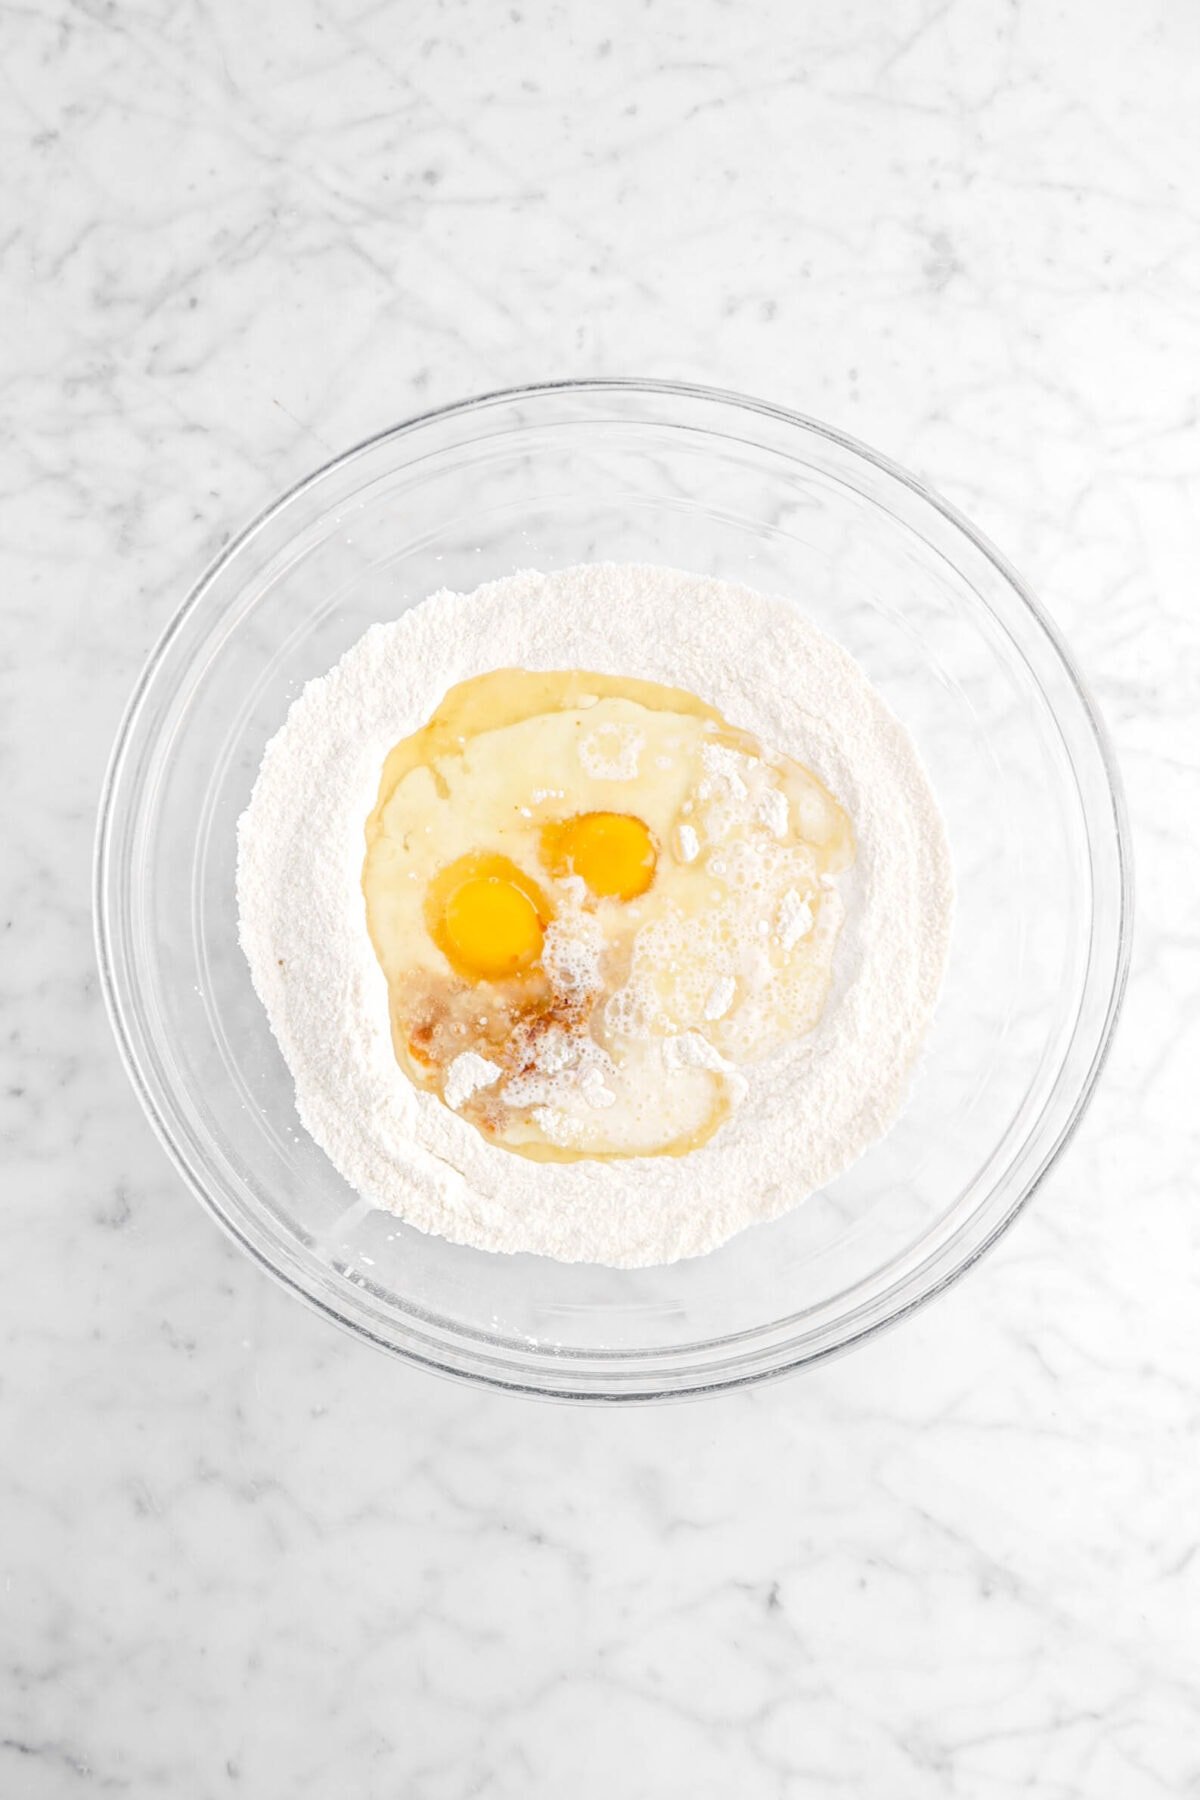 eggs, milk, oil, and vanilla added to dry ingredients